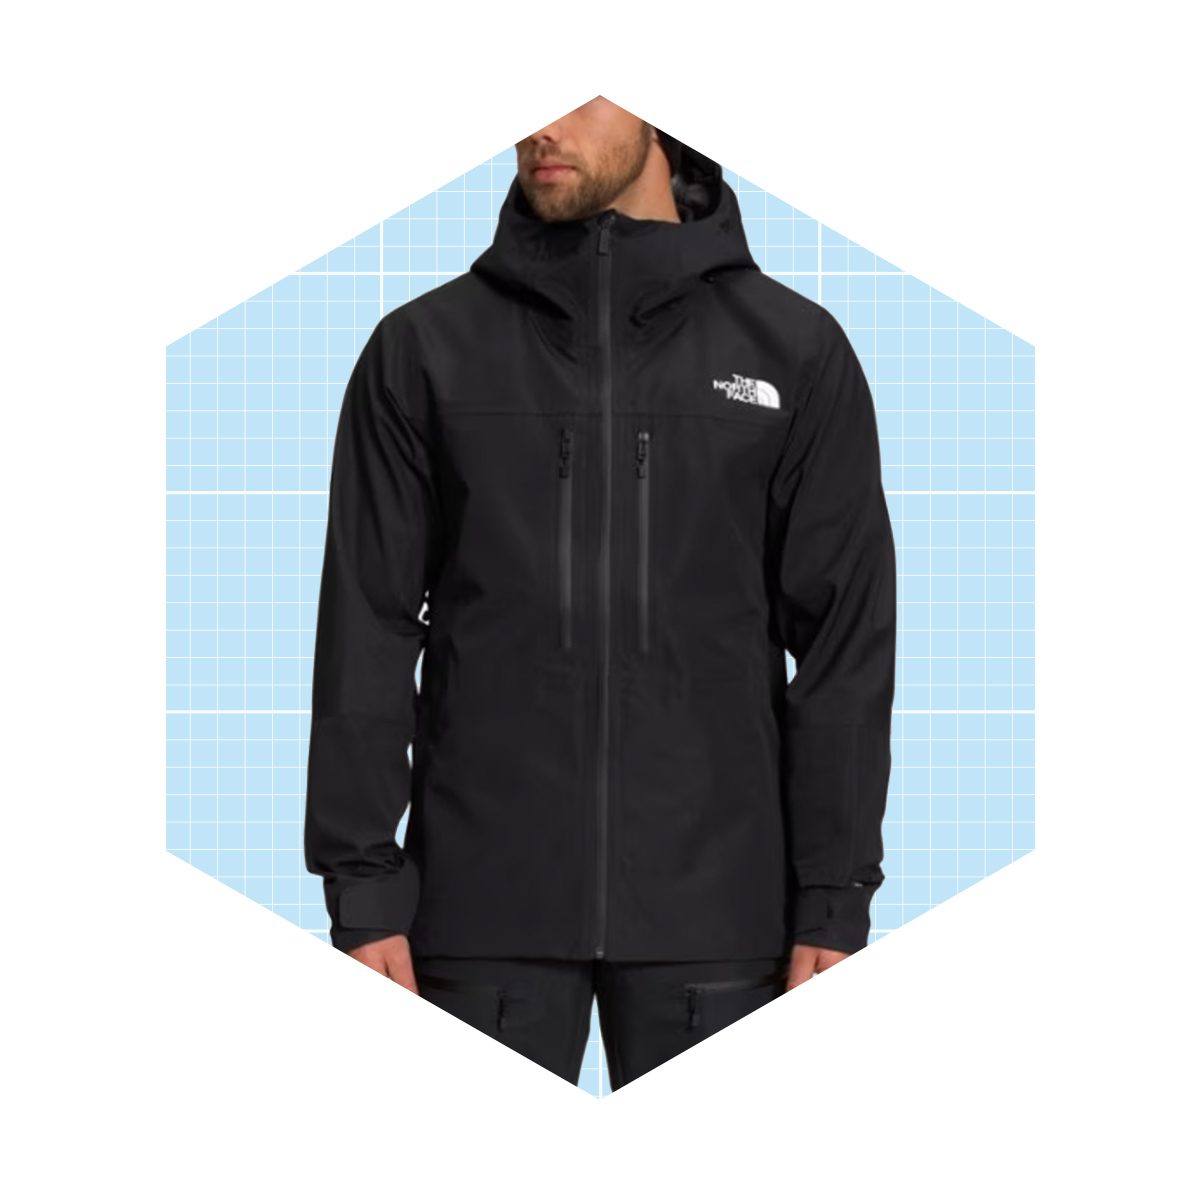 The North Face Ceptor Jacket Ecomm Rei.com